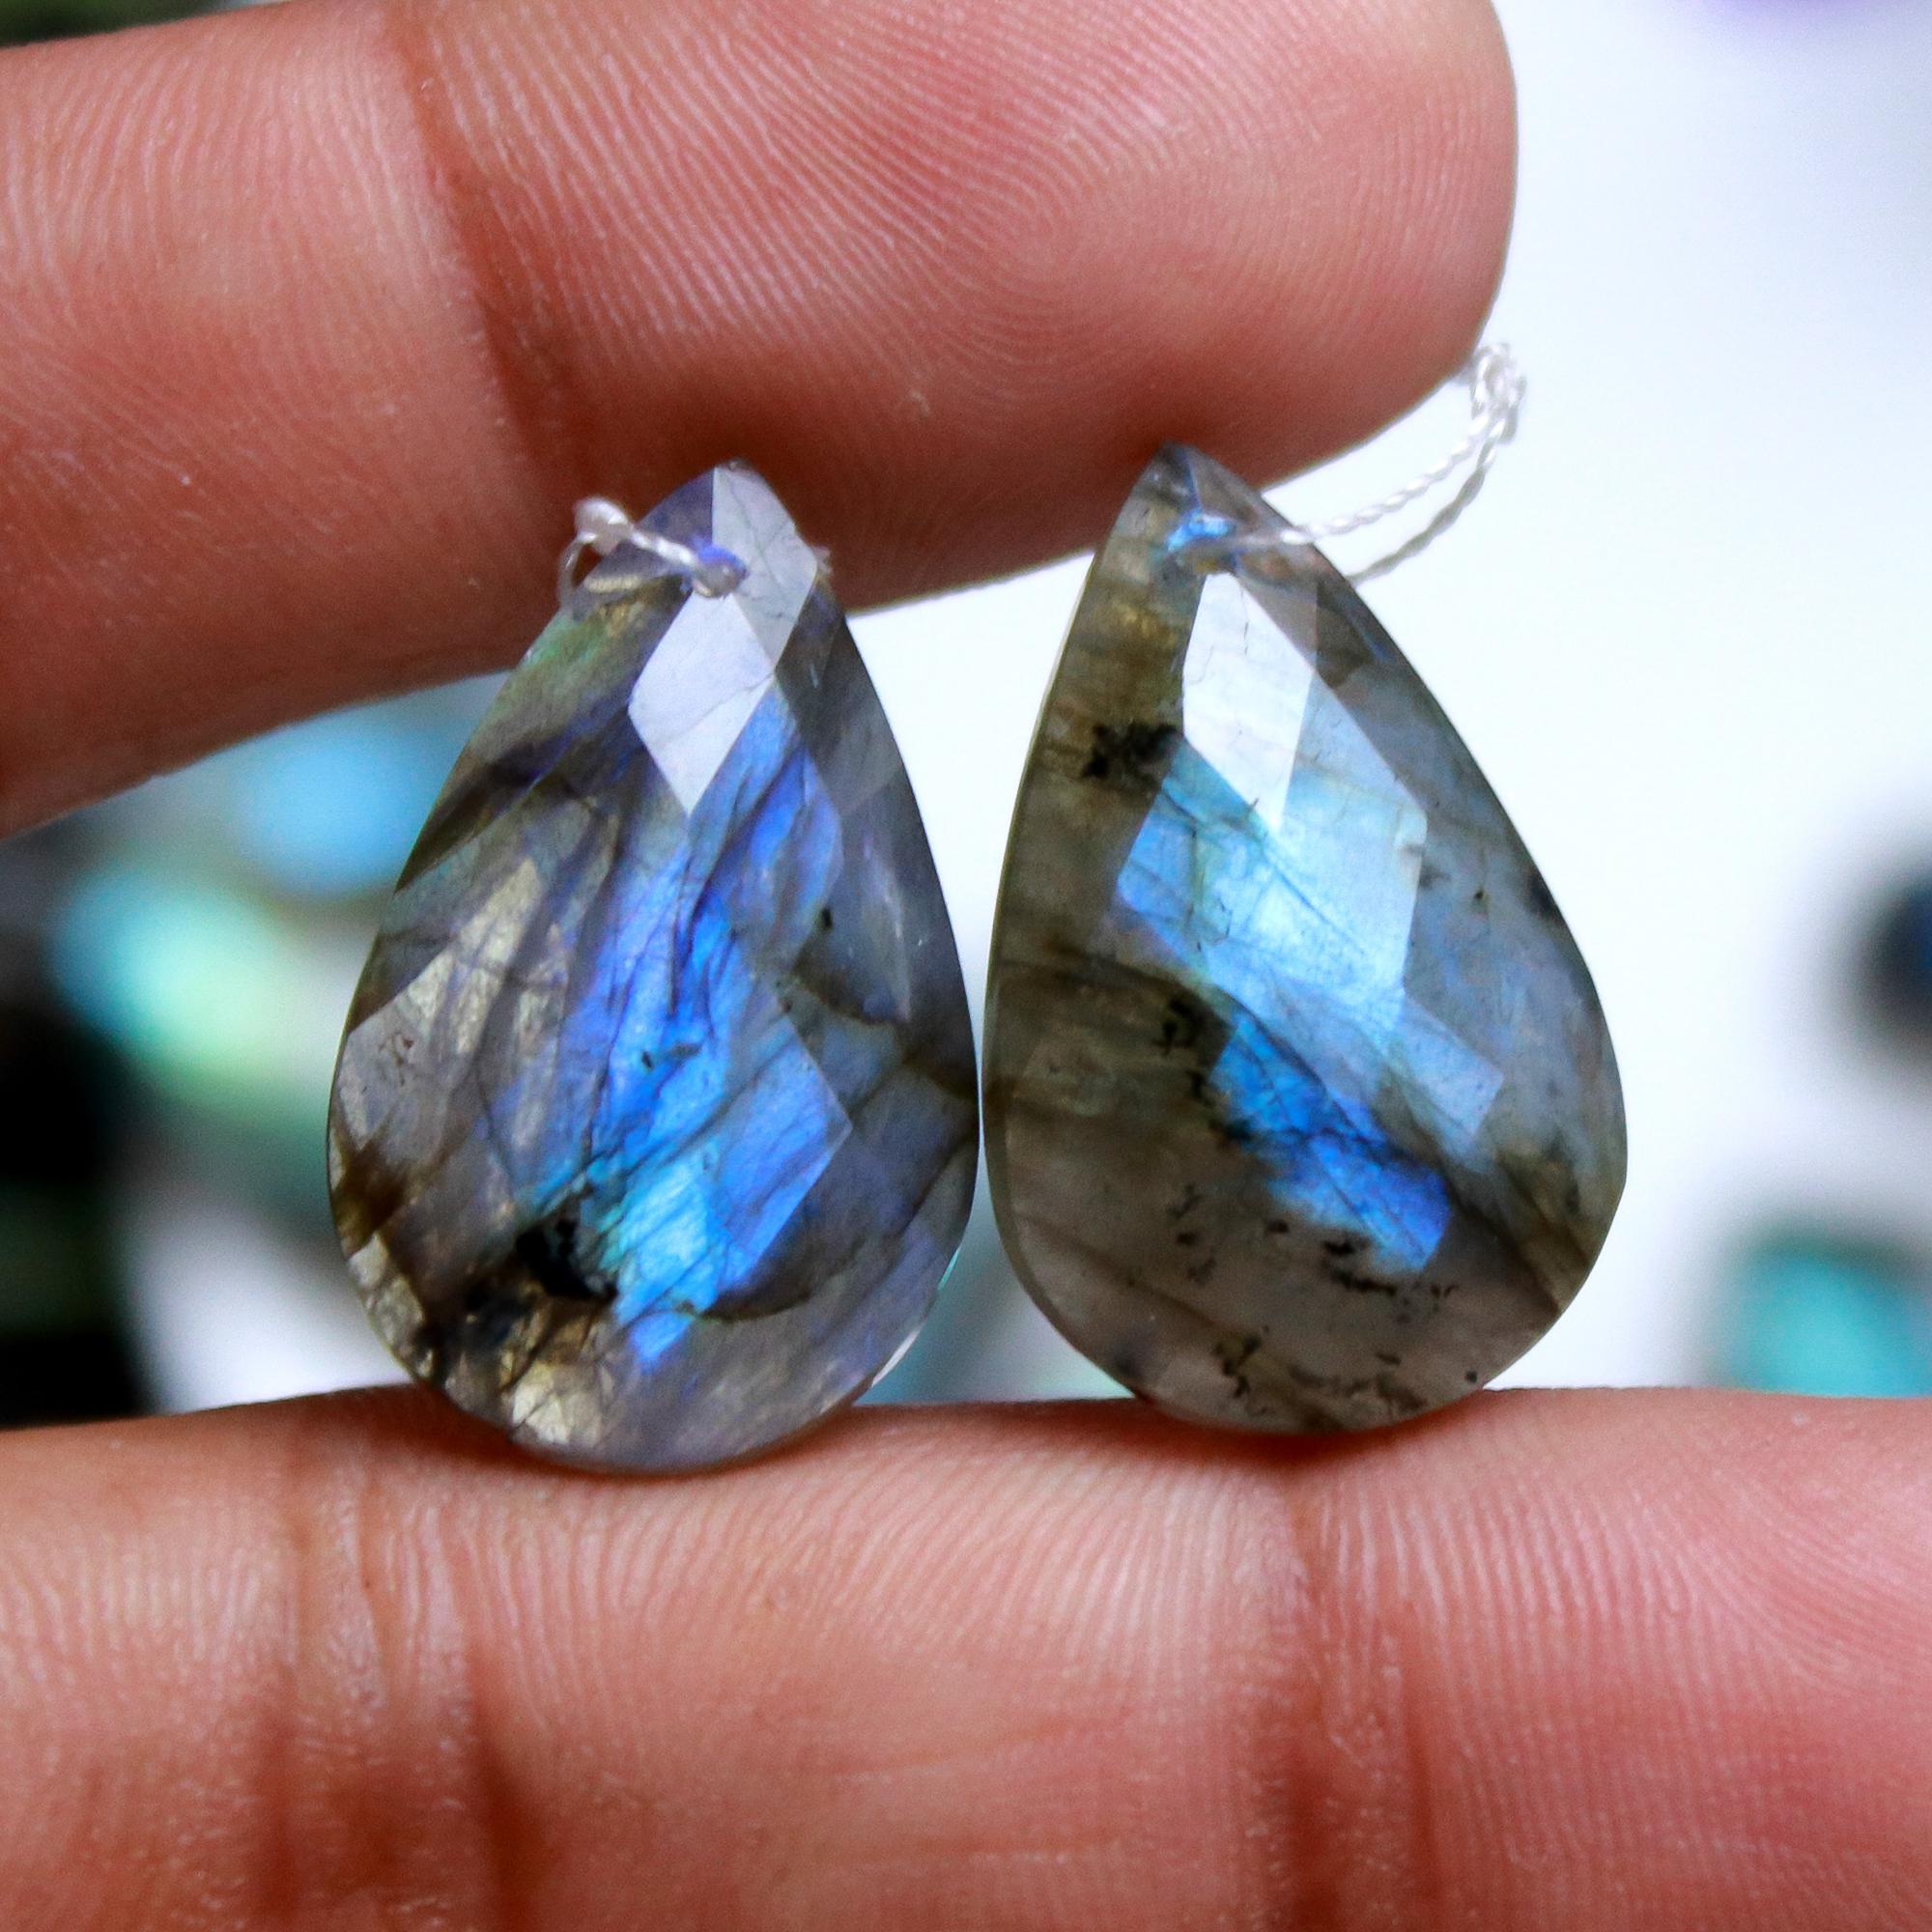 5 pair 121Cts Natural Faceted Labradorite Front To Back Drilled Matched Earring Pair Loose Cabochon Gemstone Lot Size 33x12 23x14mm